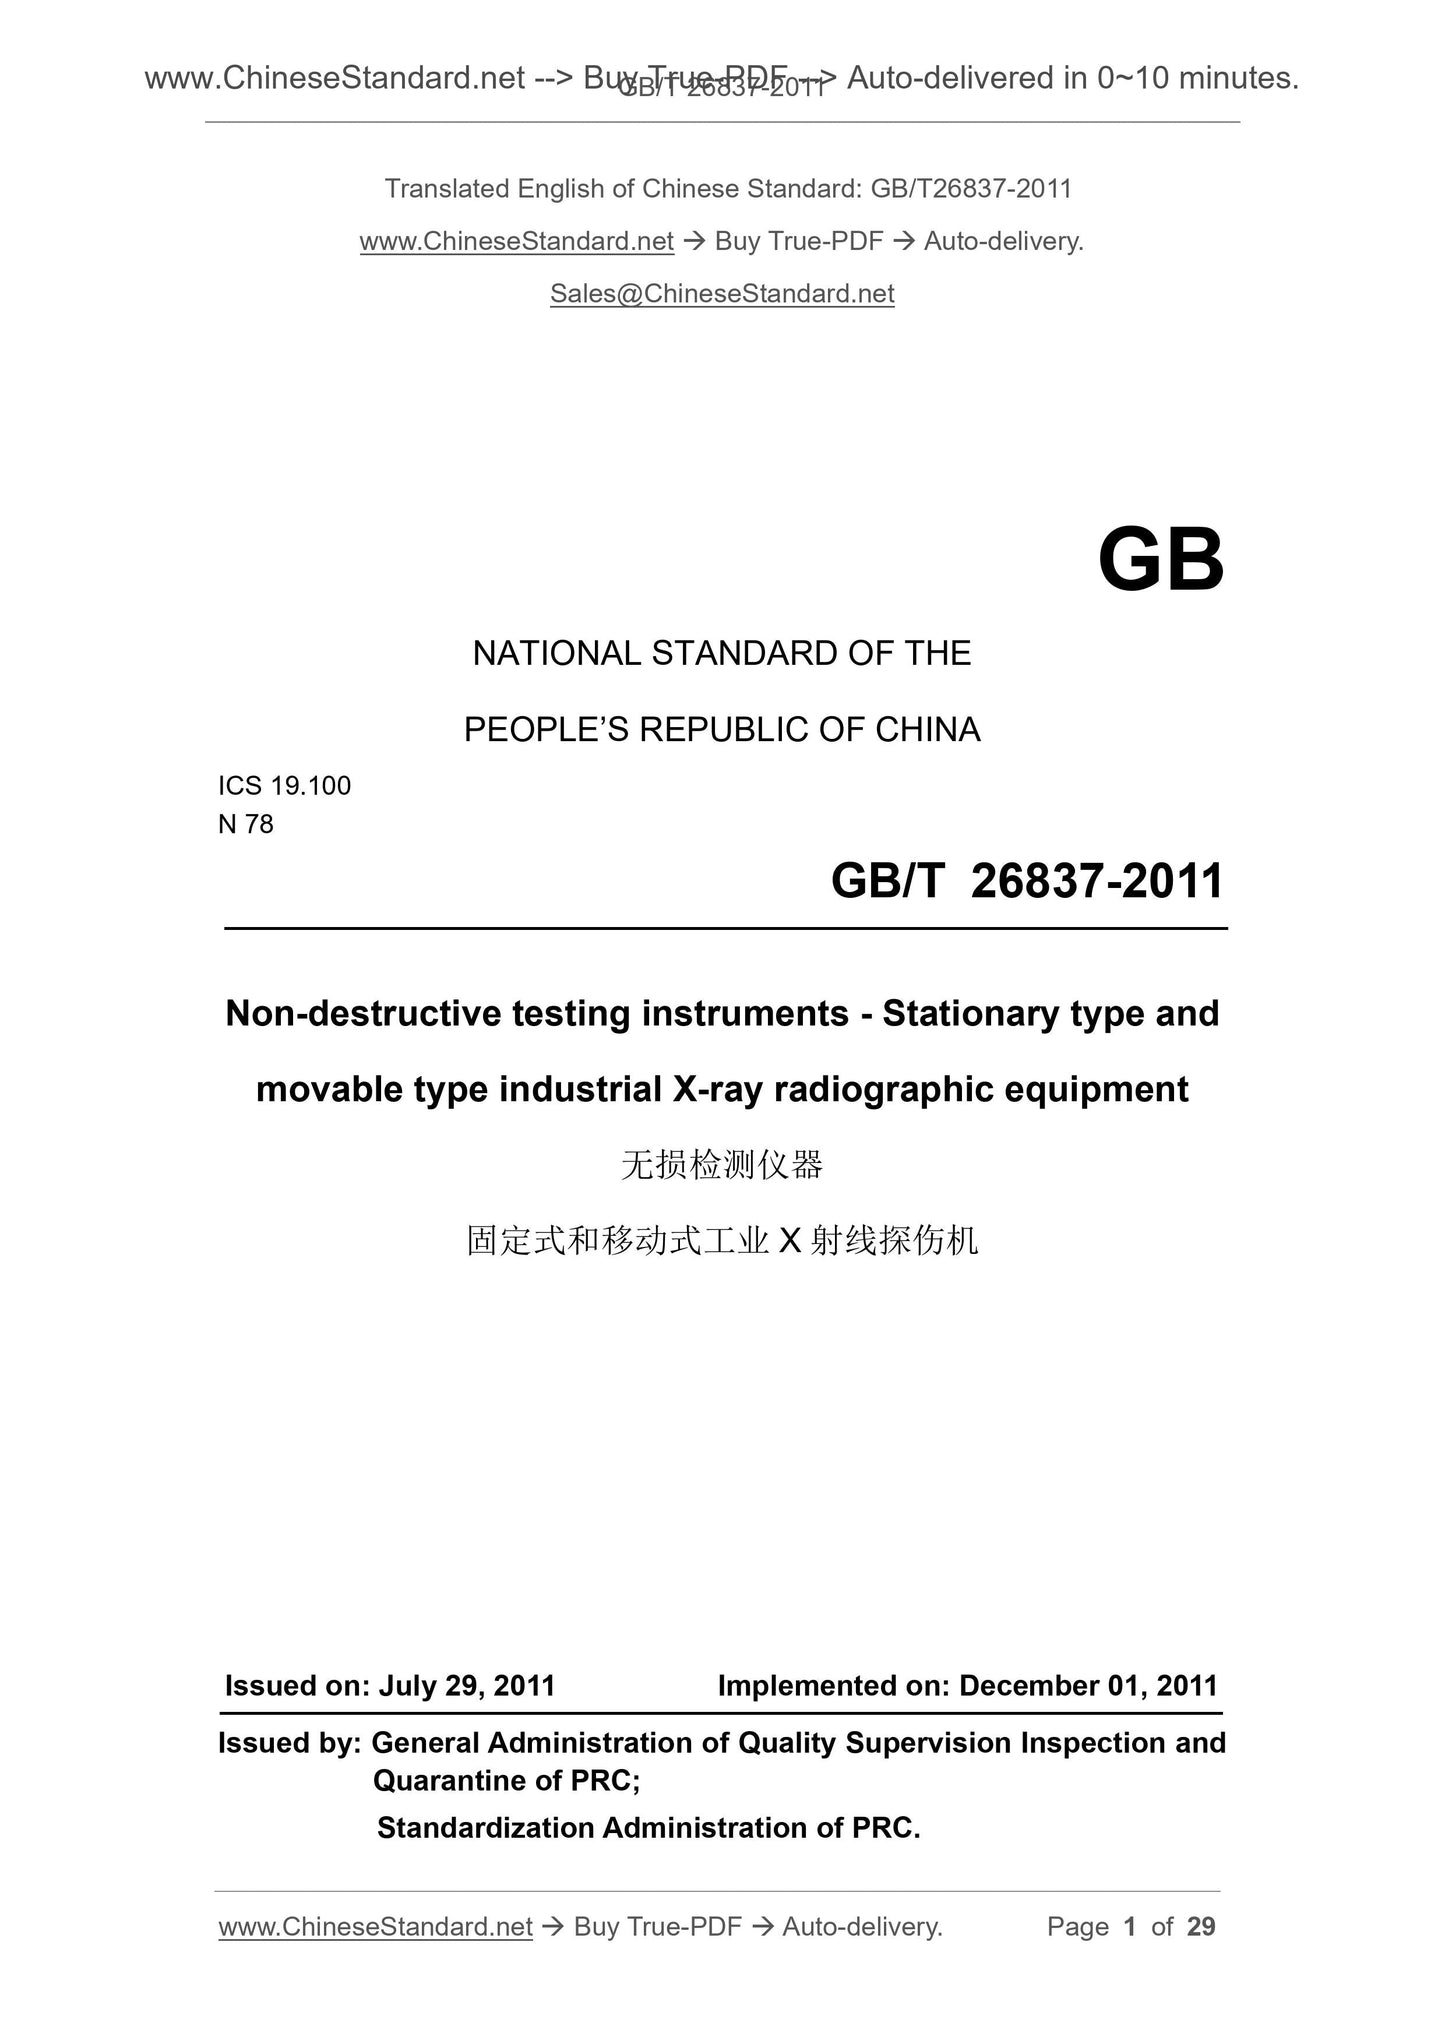 GB/T 26837-2011 Page 1